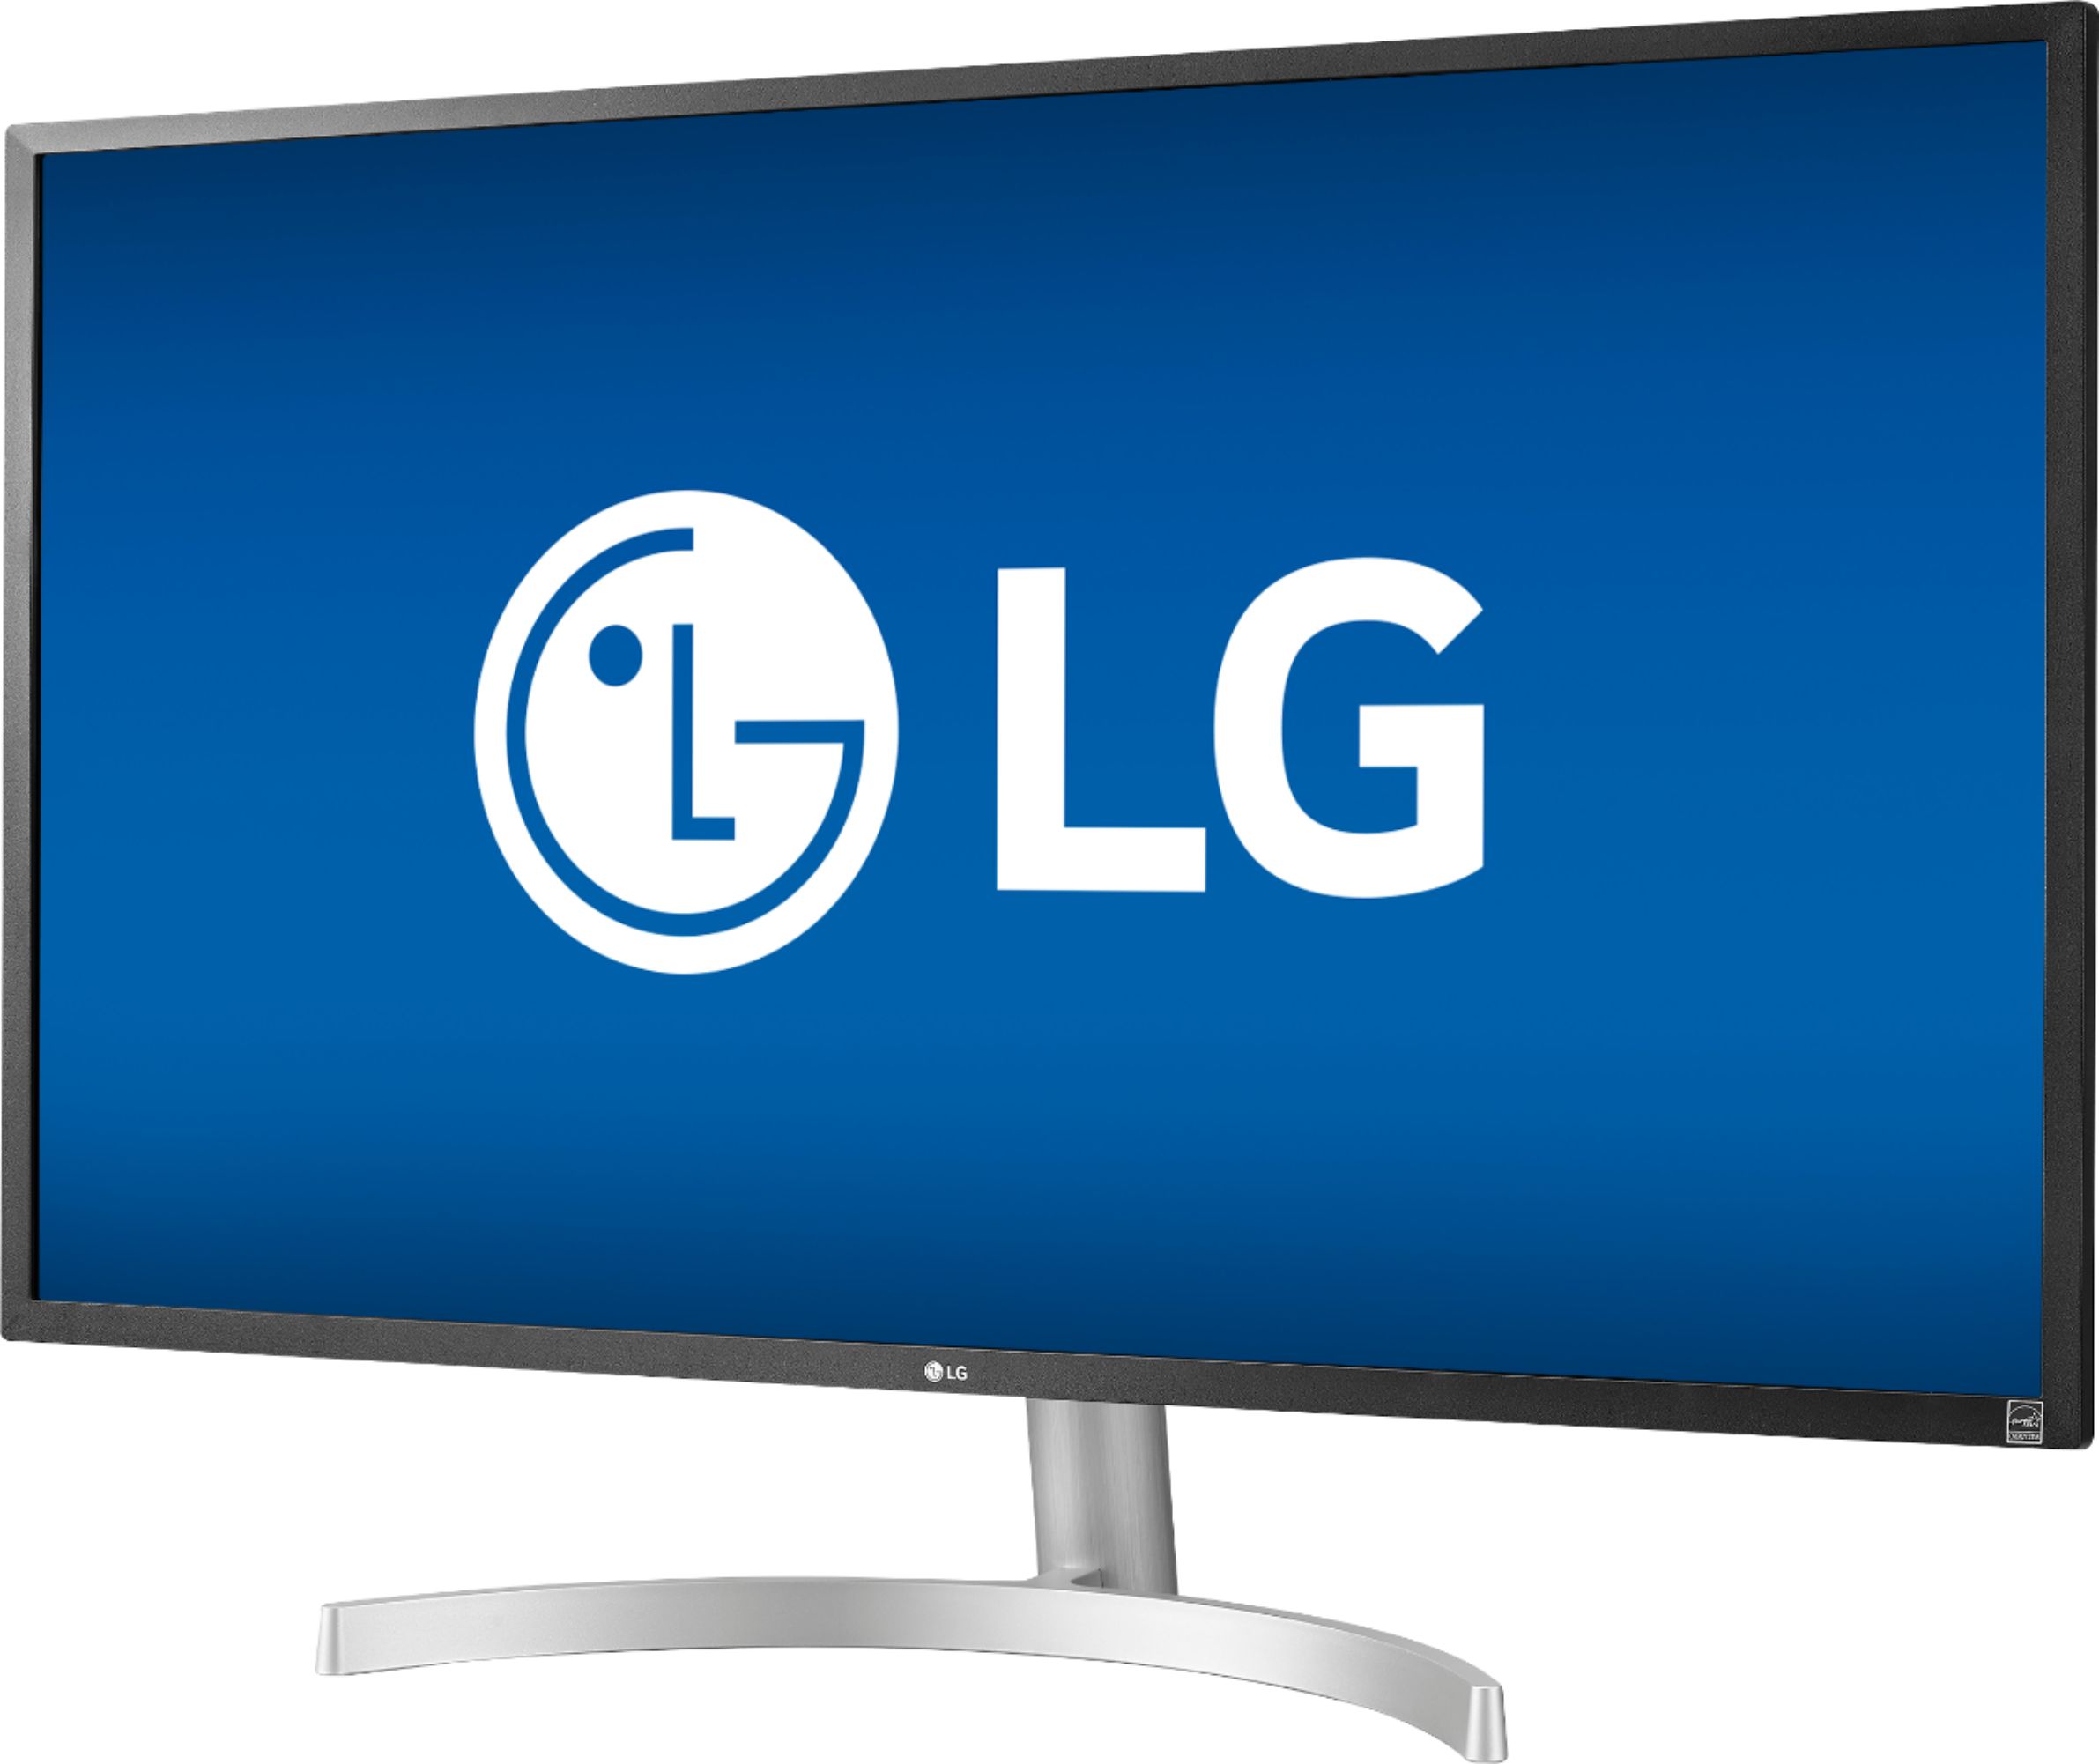 Left View: LG - 32” UHD (3840 x 2160) HDR Monitor with AMD FreeSync - (DisplayPort, HDMI) - White